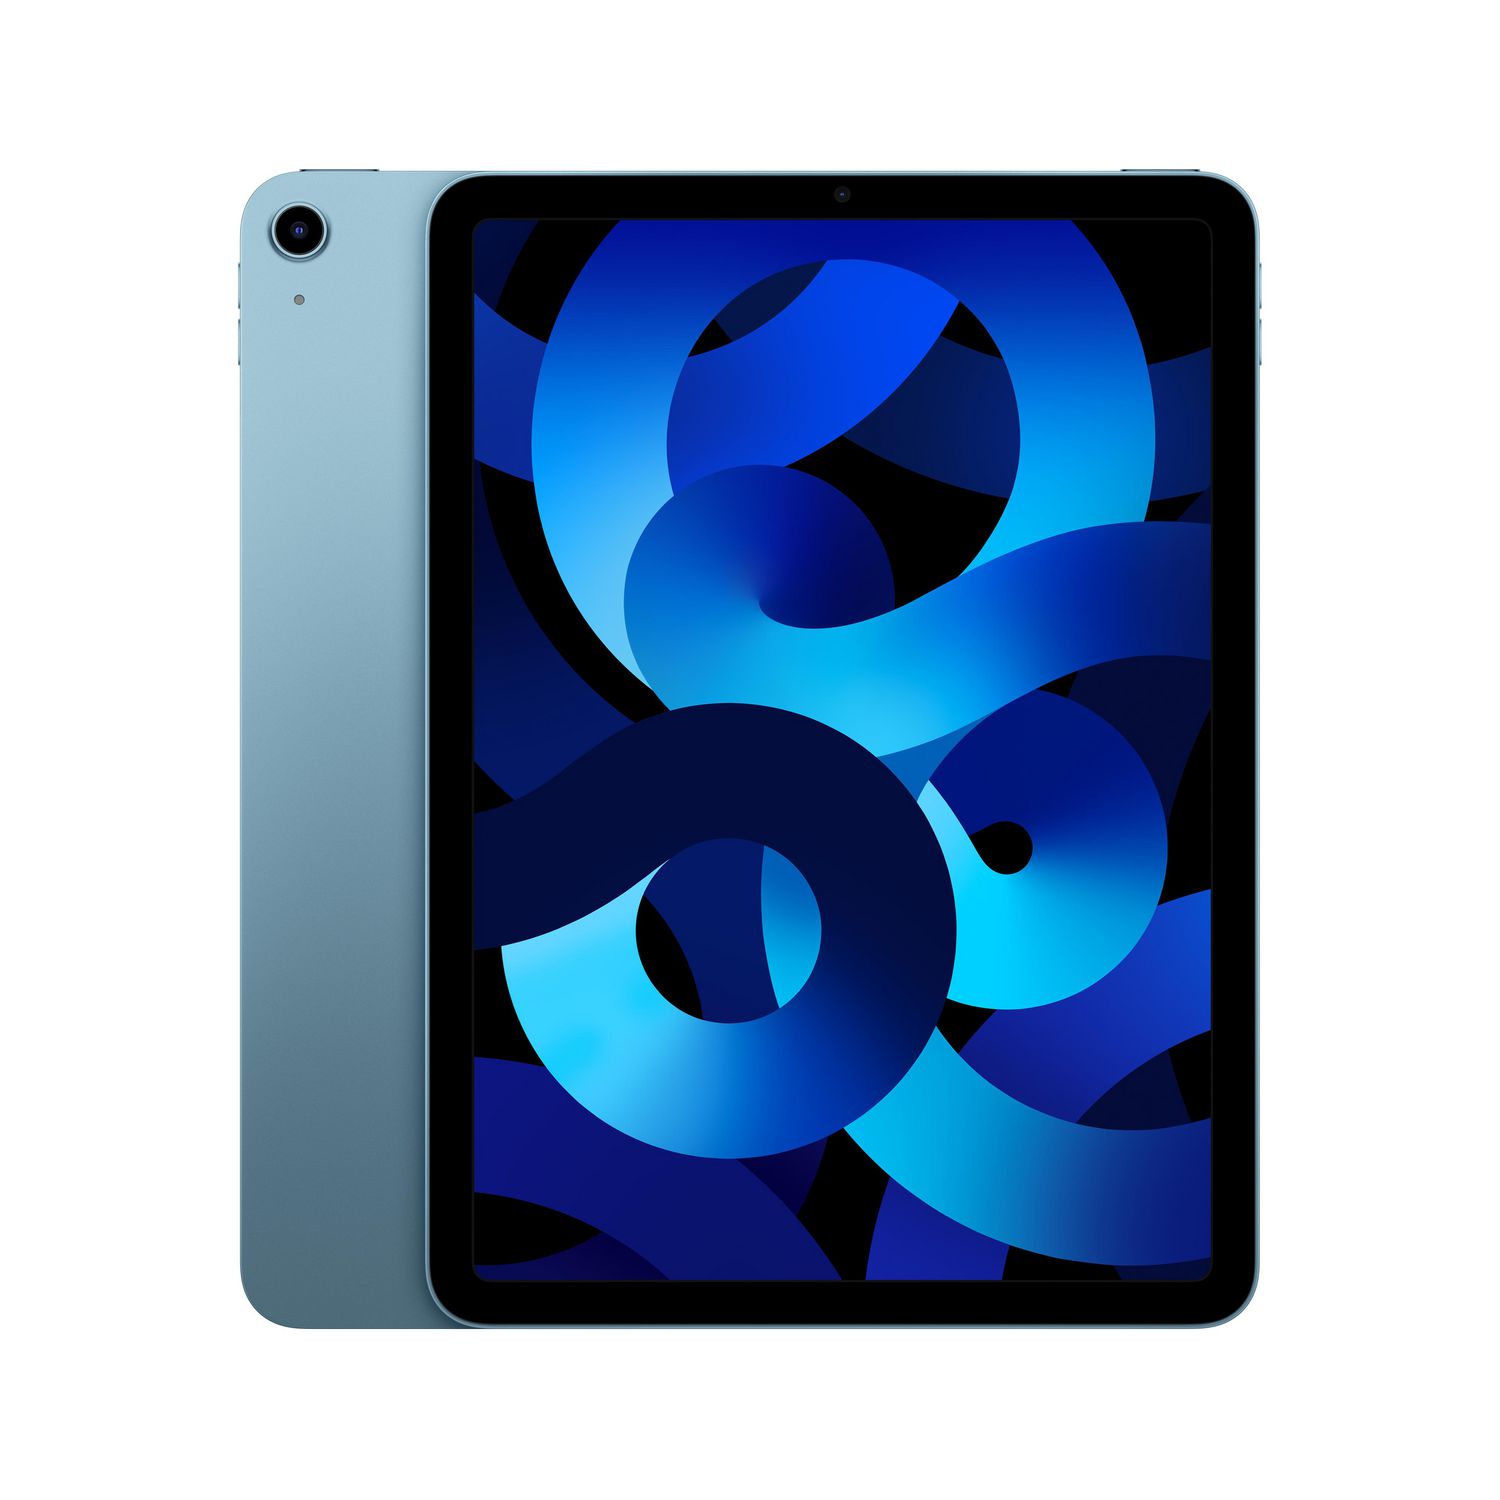 iPad Air (5th gen) 64g, Light. Bright. Full of might. Supercharged by M1.